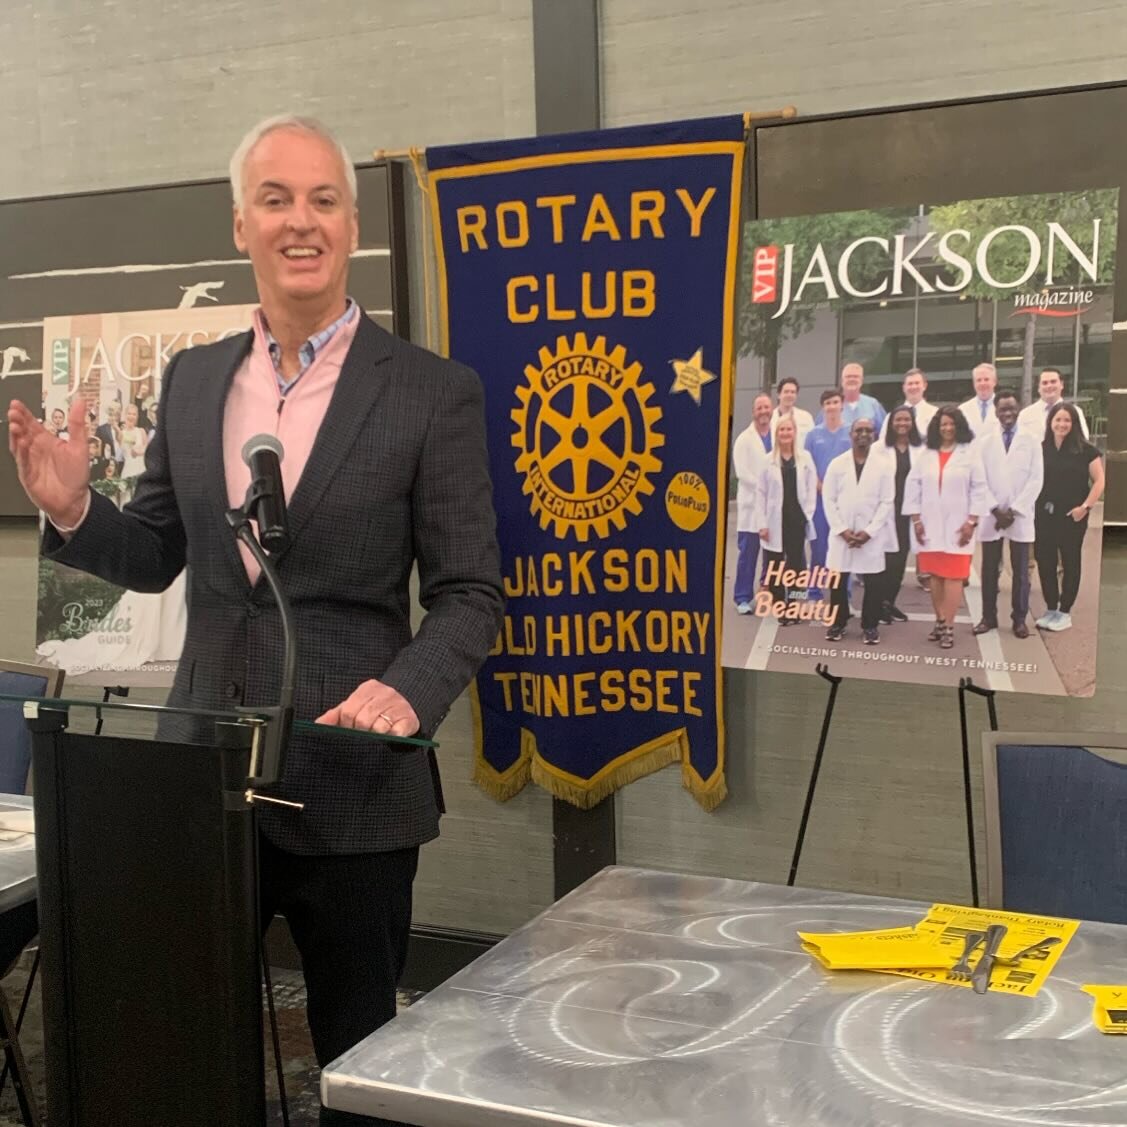 Thanks Old Hickory Rotary Club for inviting our publisher to speak at Rotary today. We love sharing the rich history of VIP, how far we have come, and what&rsquo;s in the pipeline. #printmedia #vipjackson #bestinjackson